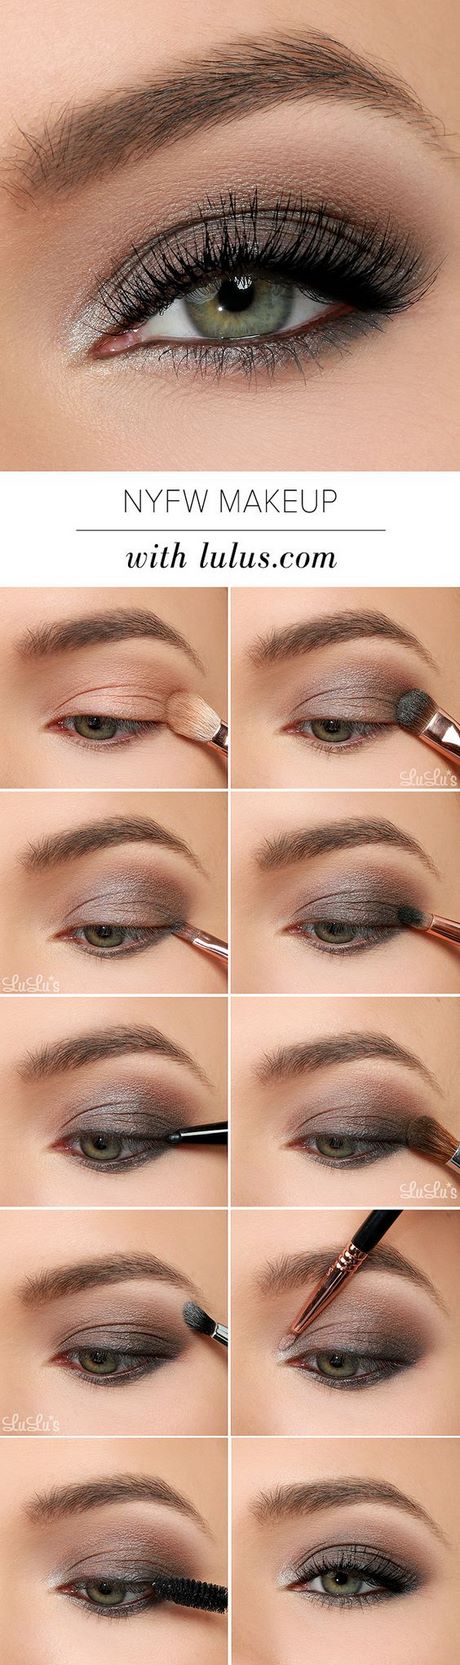 quick-and-easy-smokey-eye-makeup-tutorial-23_11 Snel en eenvoudig smokey eye make-up tutorial